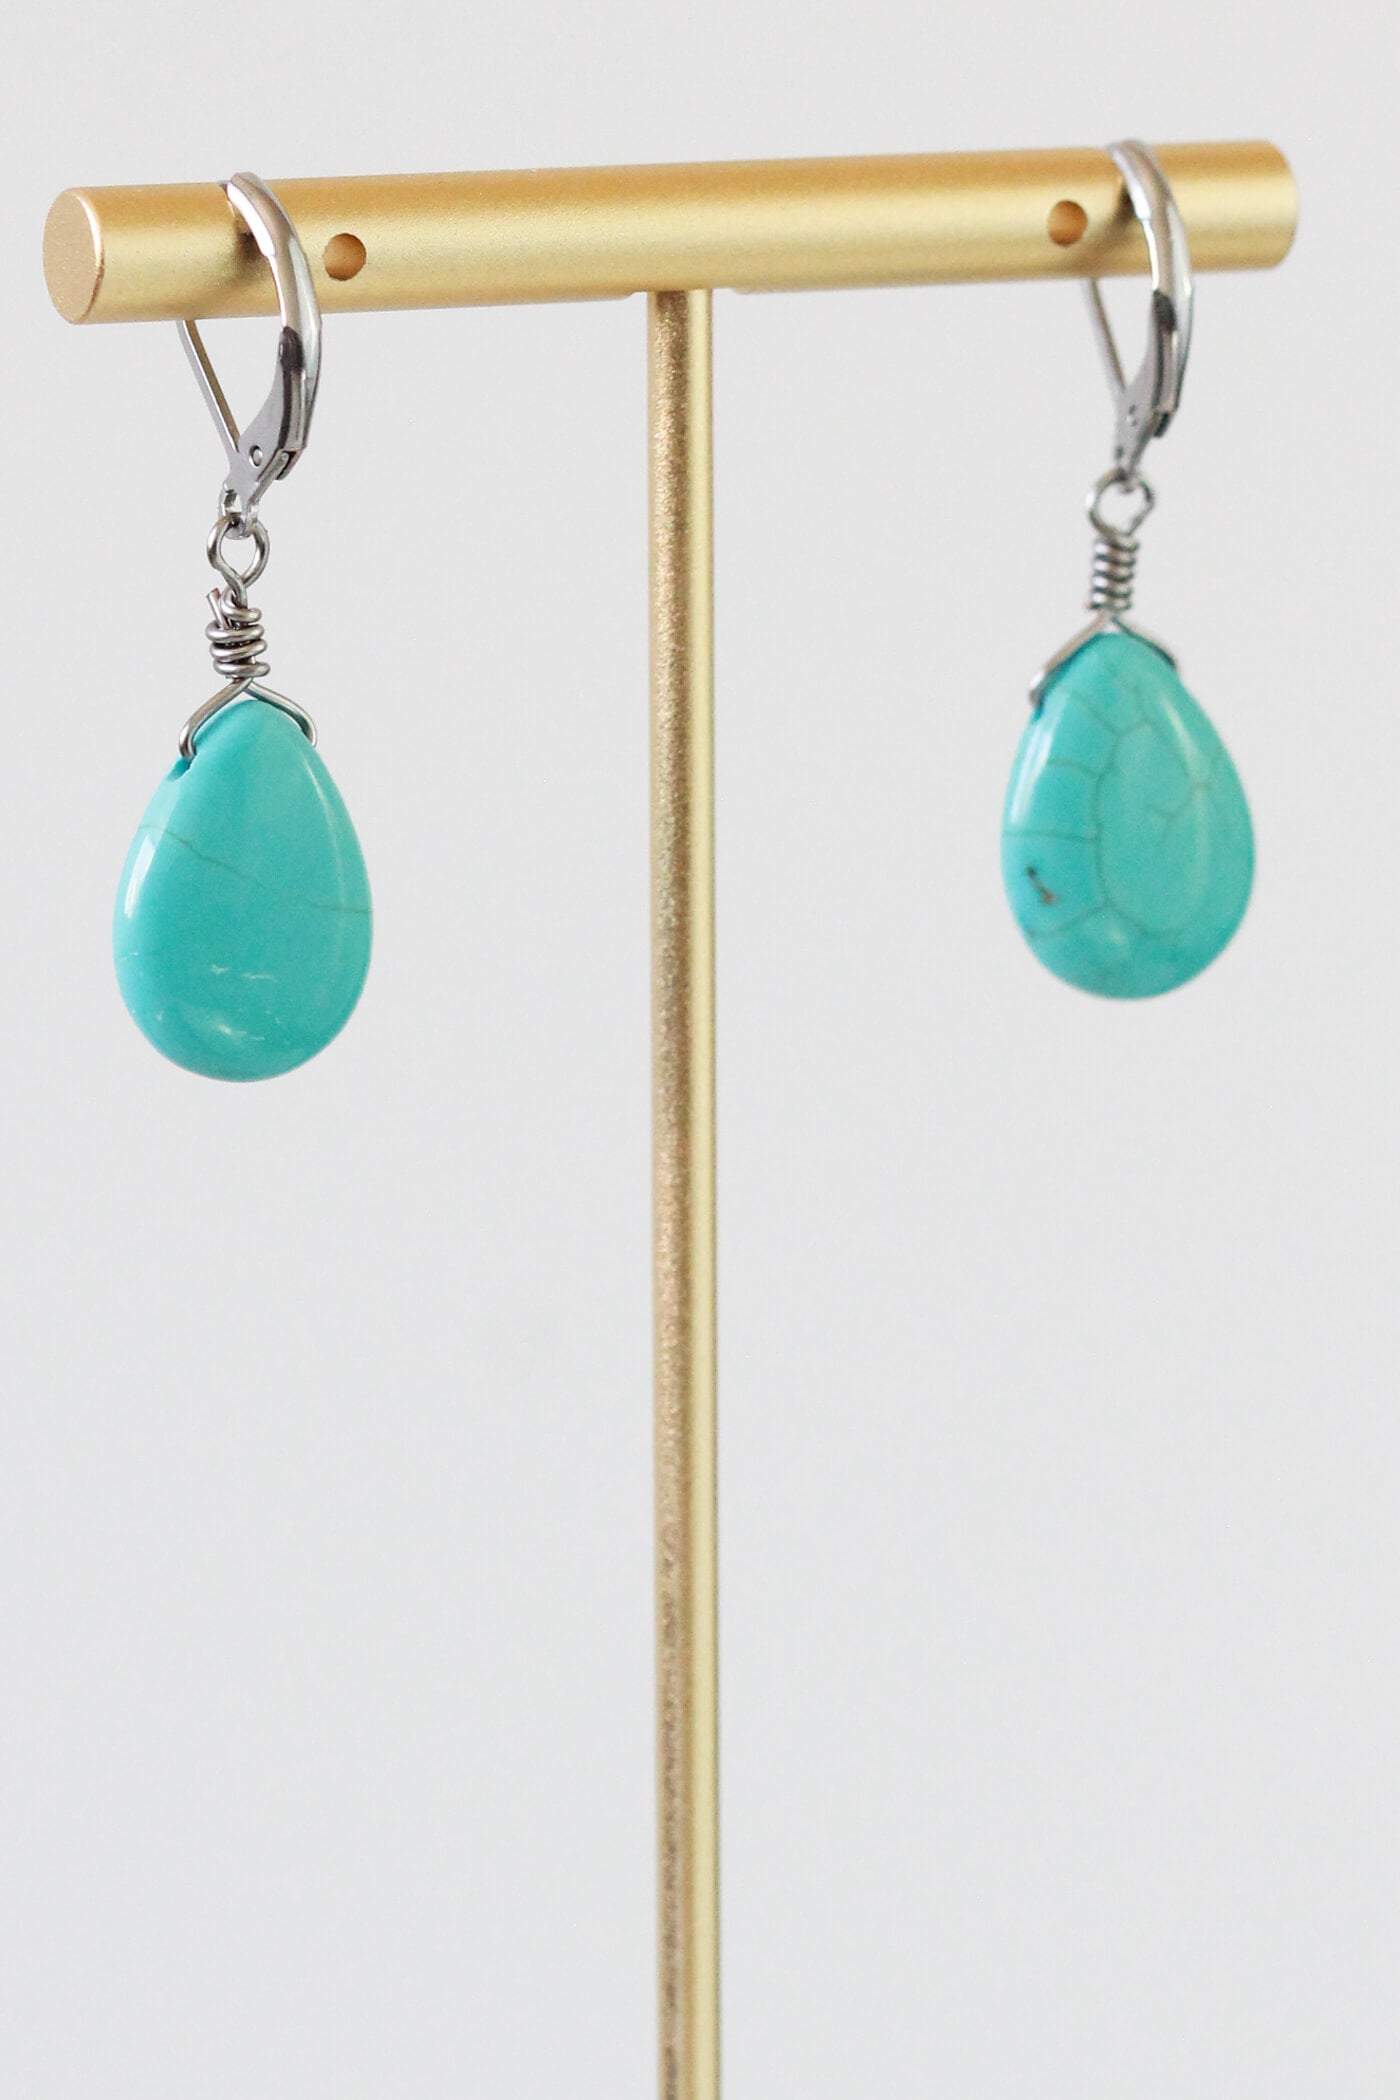 Turquoise Drop Earrings for Work by Kaleidoscopes And Polka Dots